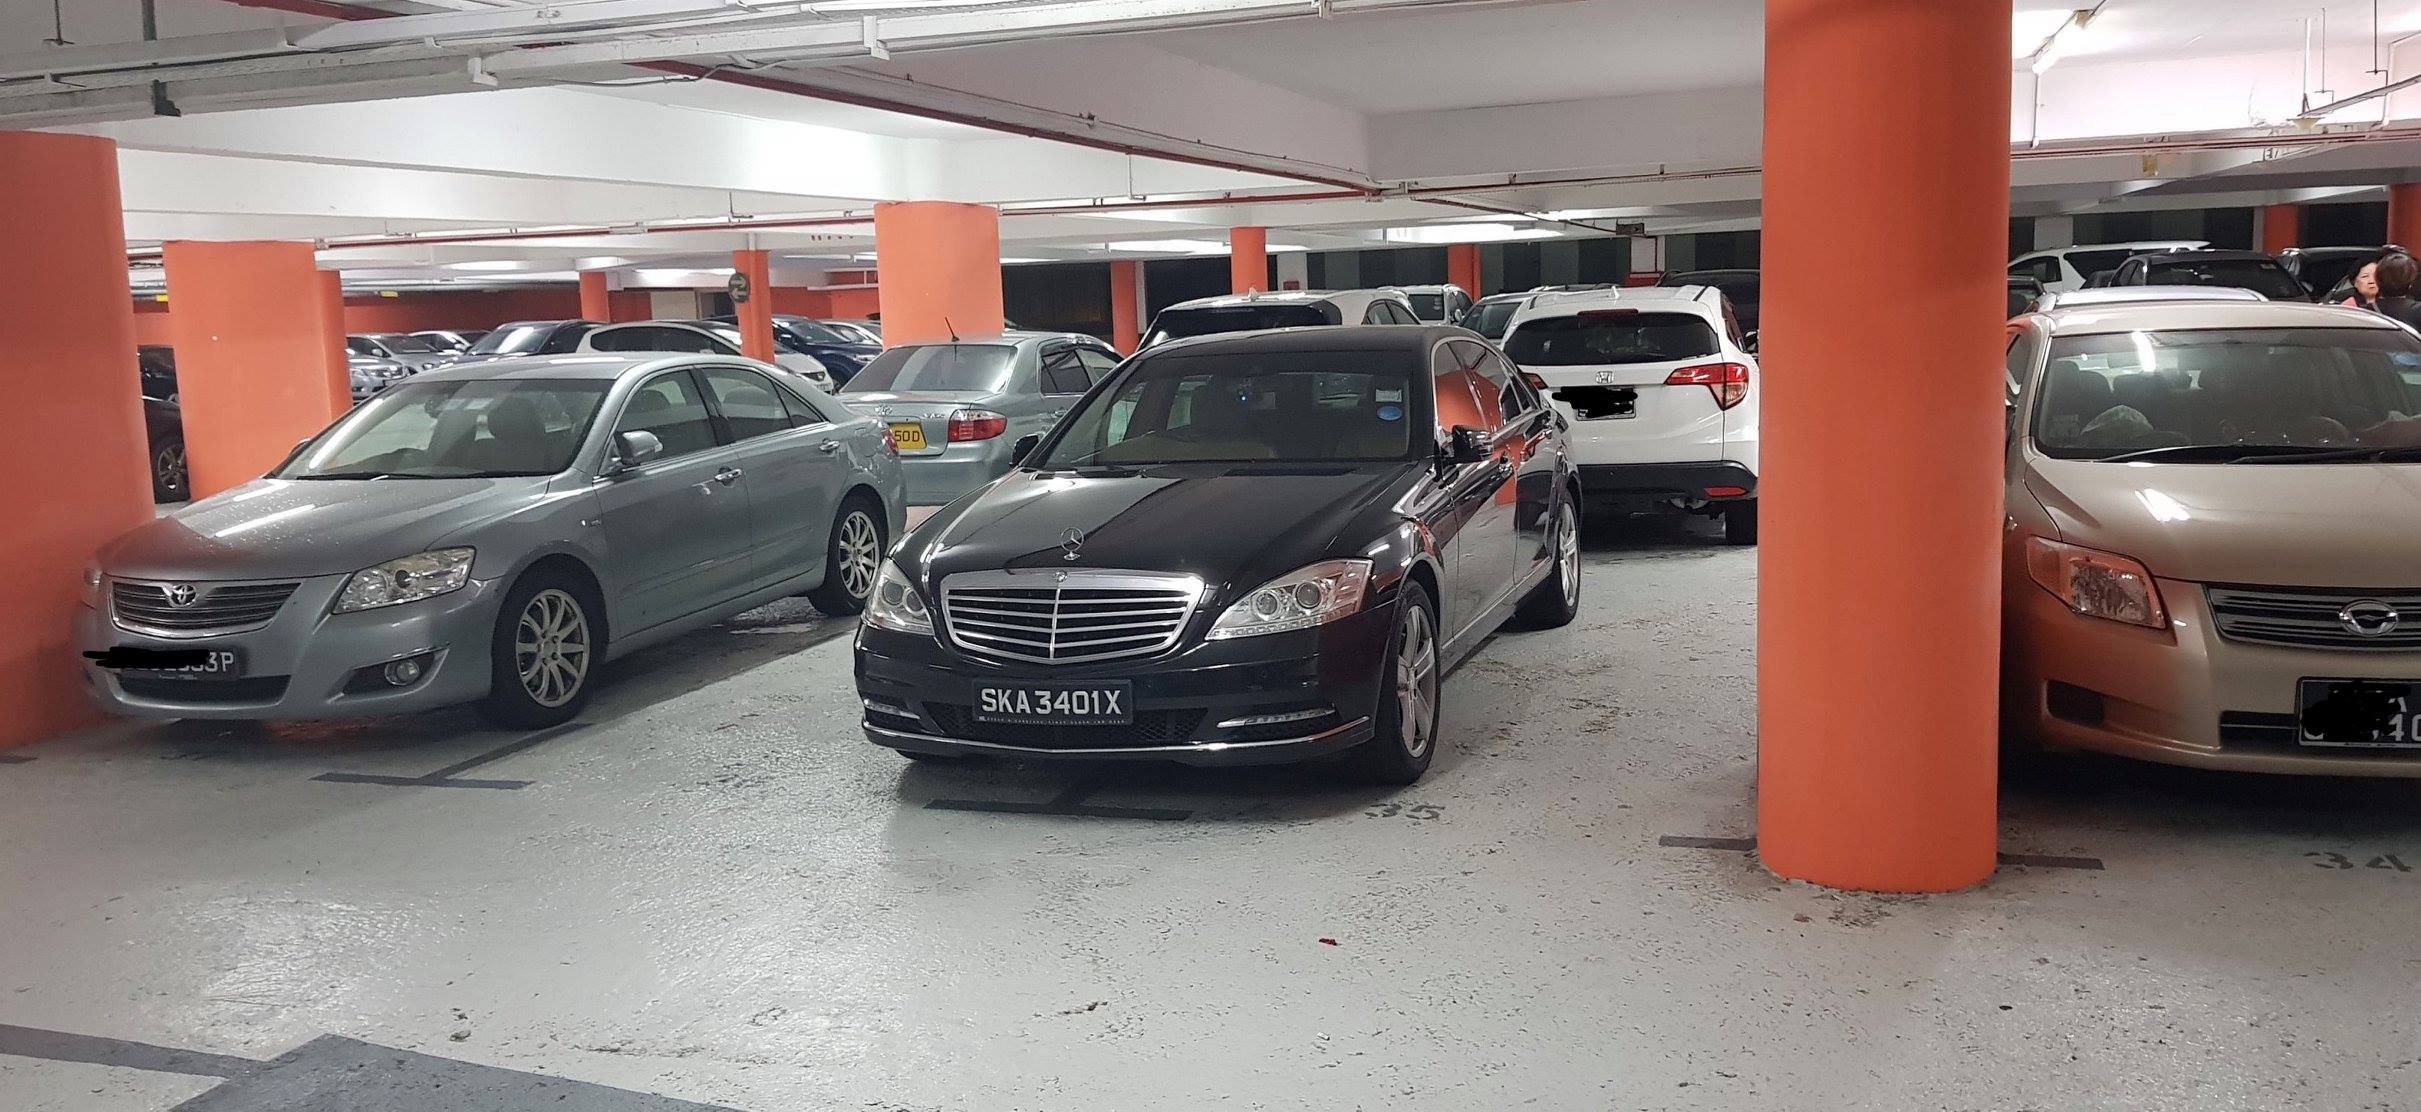 Driver thinks owning a Mercedes means big shot so can take 2 parking lots?